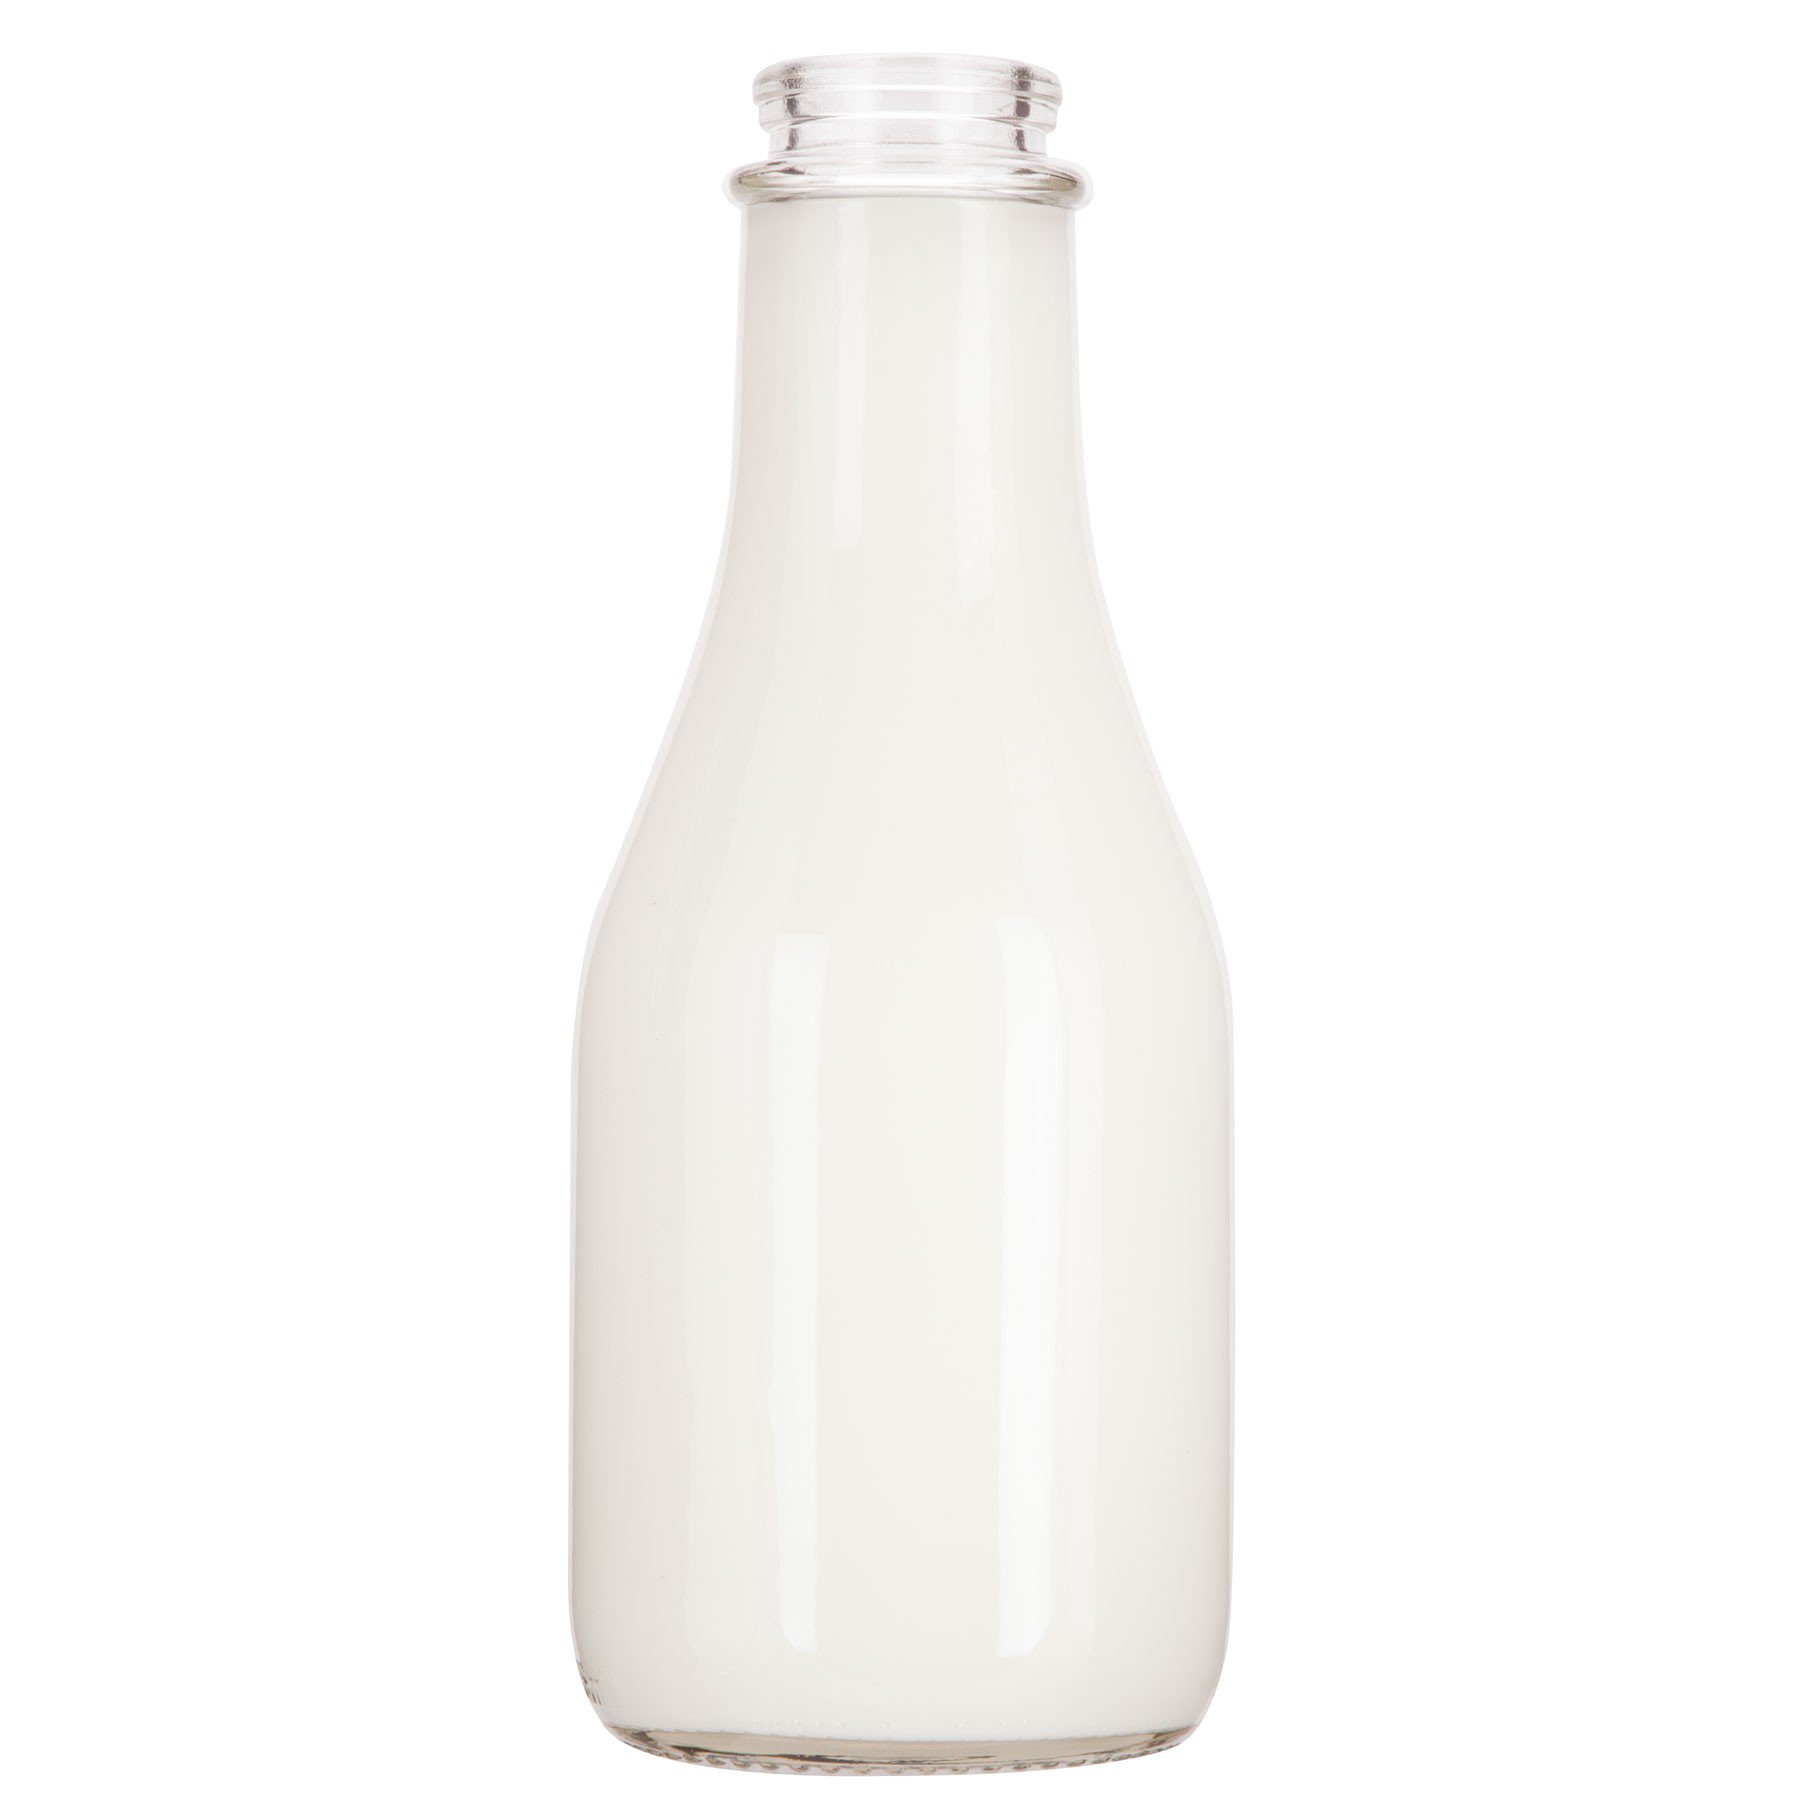 32 oz. Round Quart Clear Glass Milk Bottle - The Cary Company